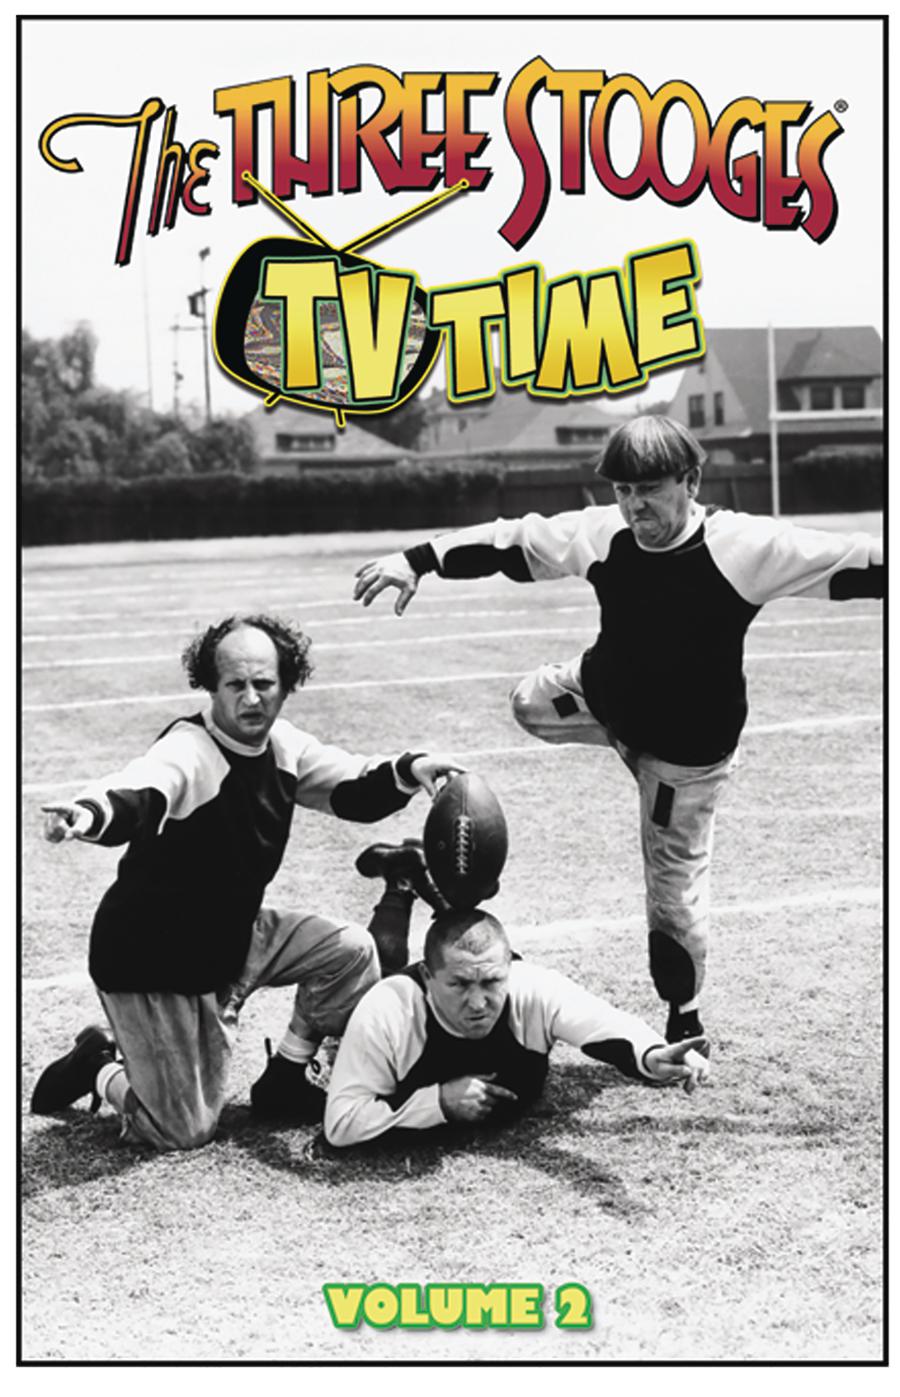 Three Stooges Vol 2 TV Time TP Limited Edition Photo Cover